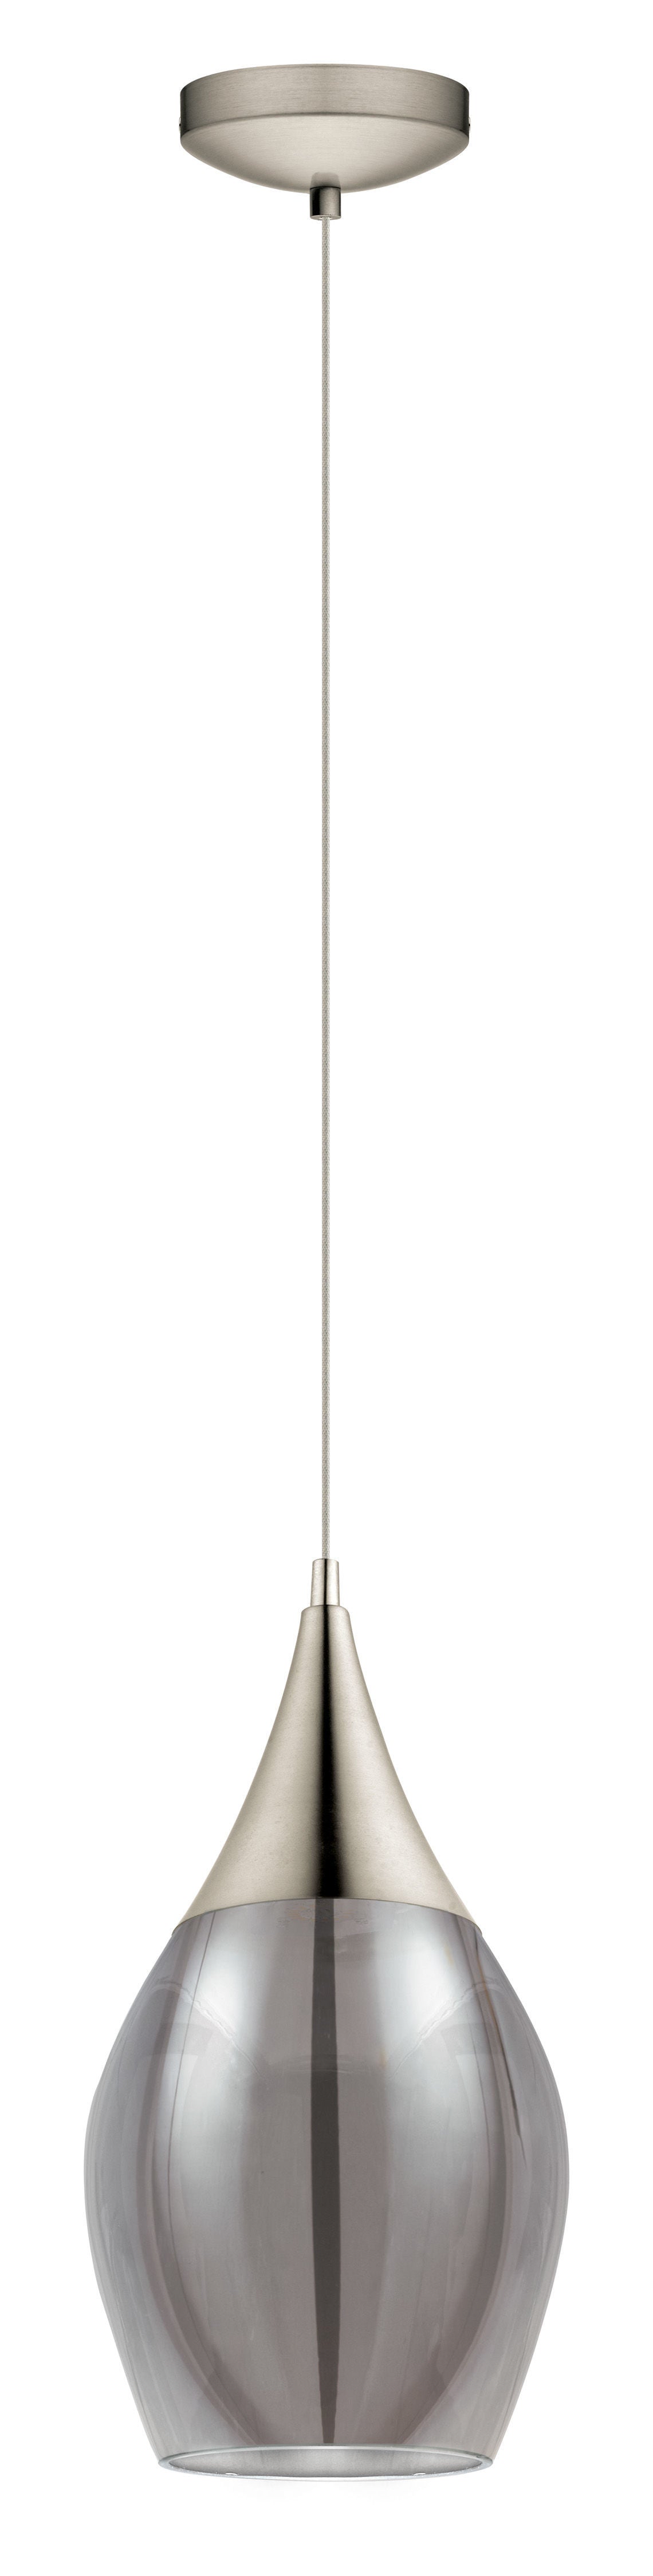 Nuves Pendant Stainless steel INTEGRATED LED - 202429A | EGLO